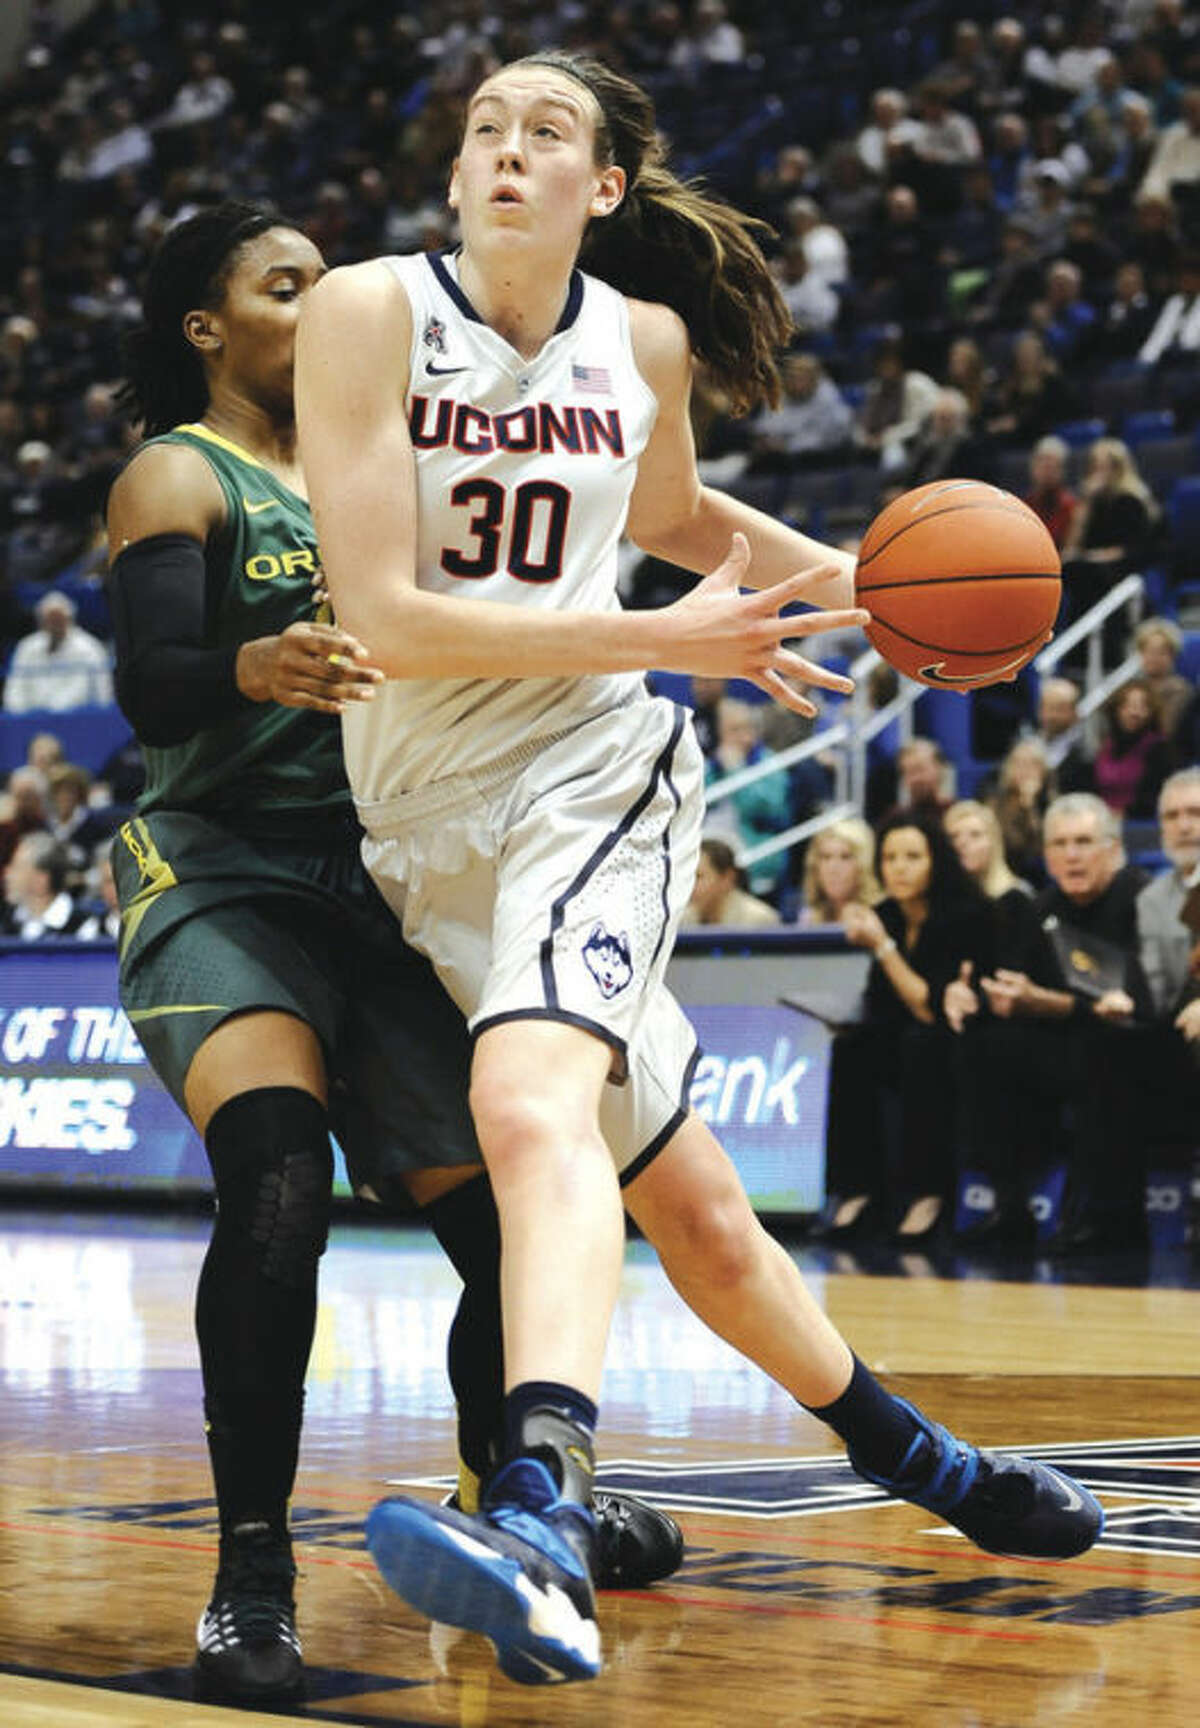 AP photo UConn's Breanna Stewart, right, drives past Oregon's Chrishae Rowe during Wednesday night'sgame at the XL Center. Stewart had a game-high 28 points for the top-ranked Huskies in their 114-68 victory over the Ducks.